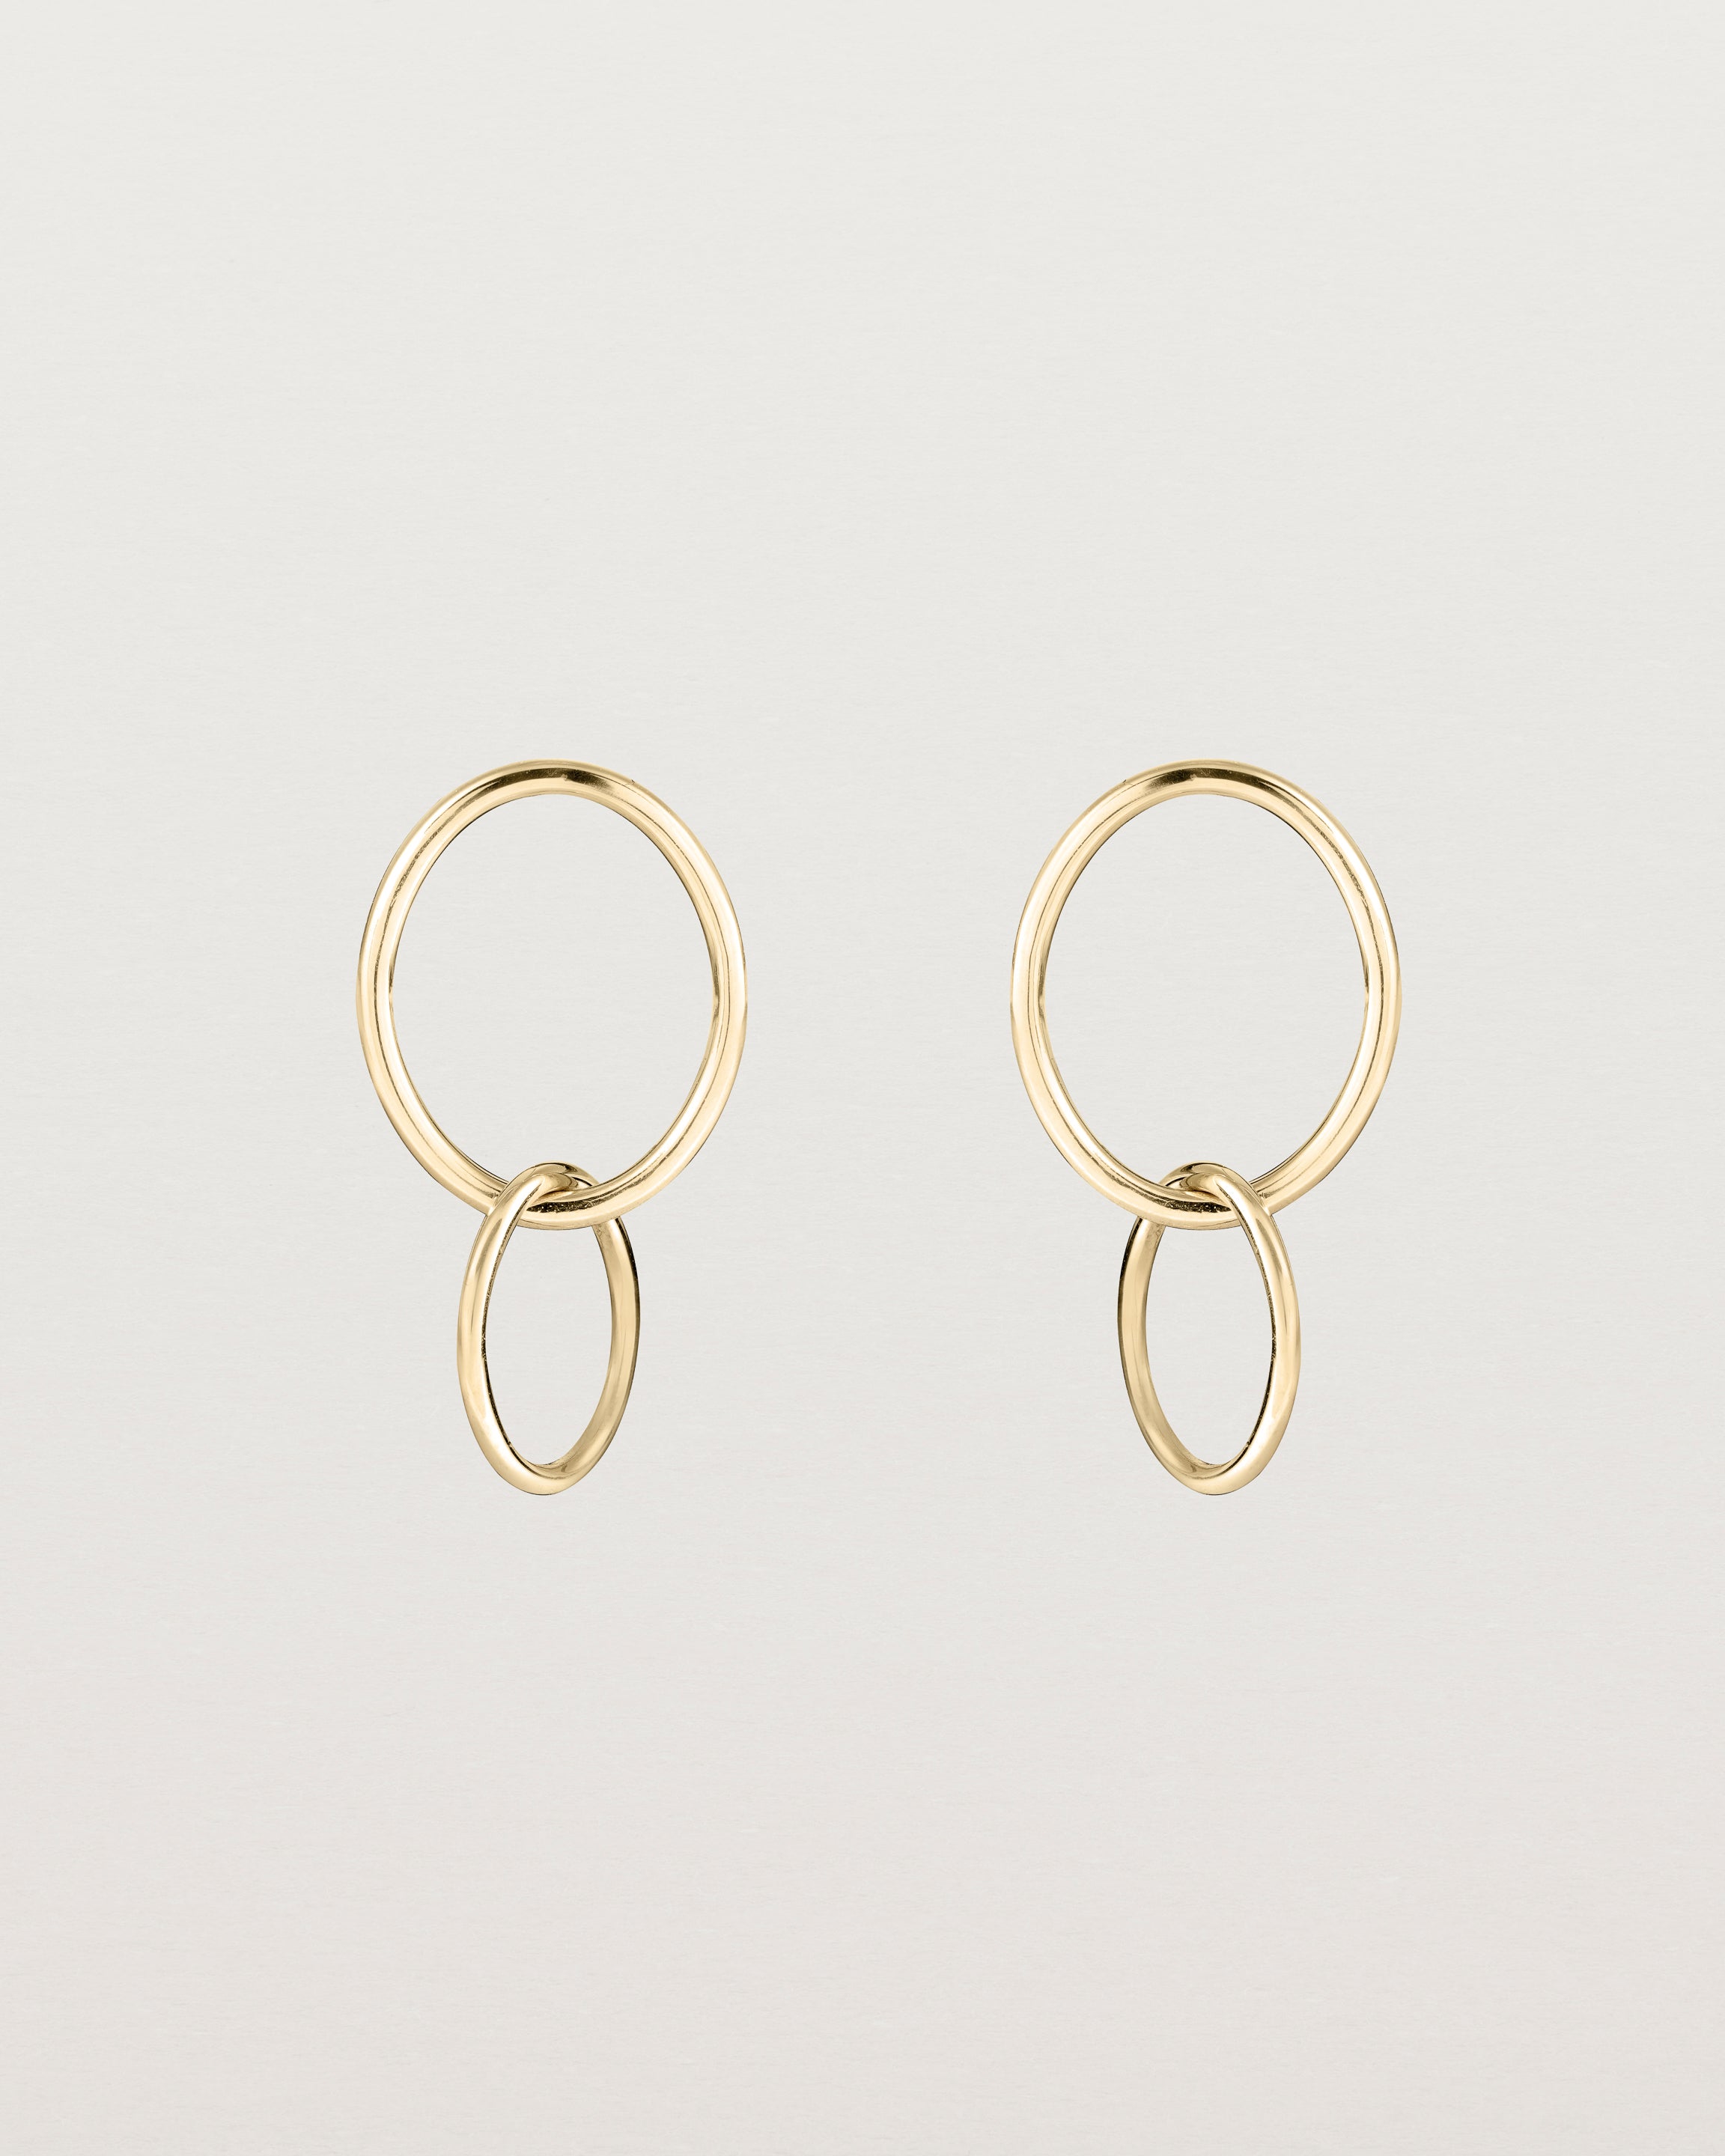 A pair of yellow gold studs featuring two intertwined hanging ovals